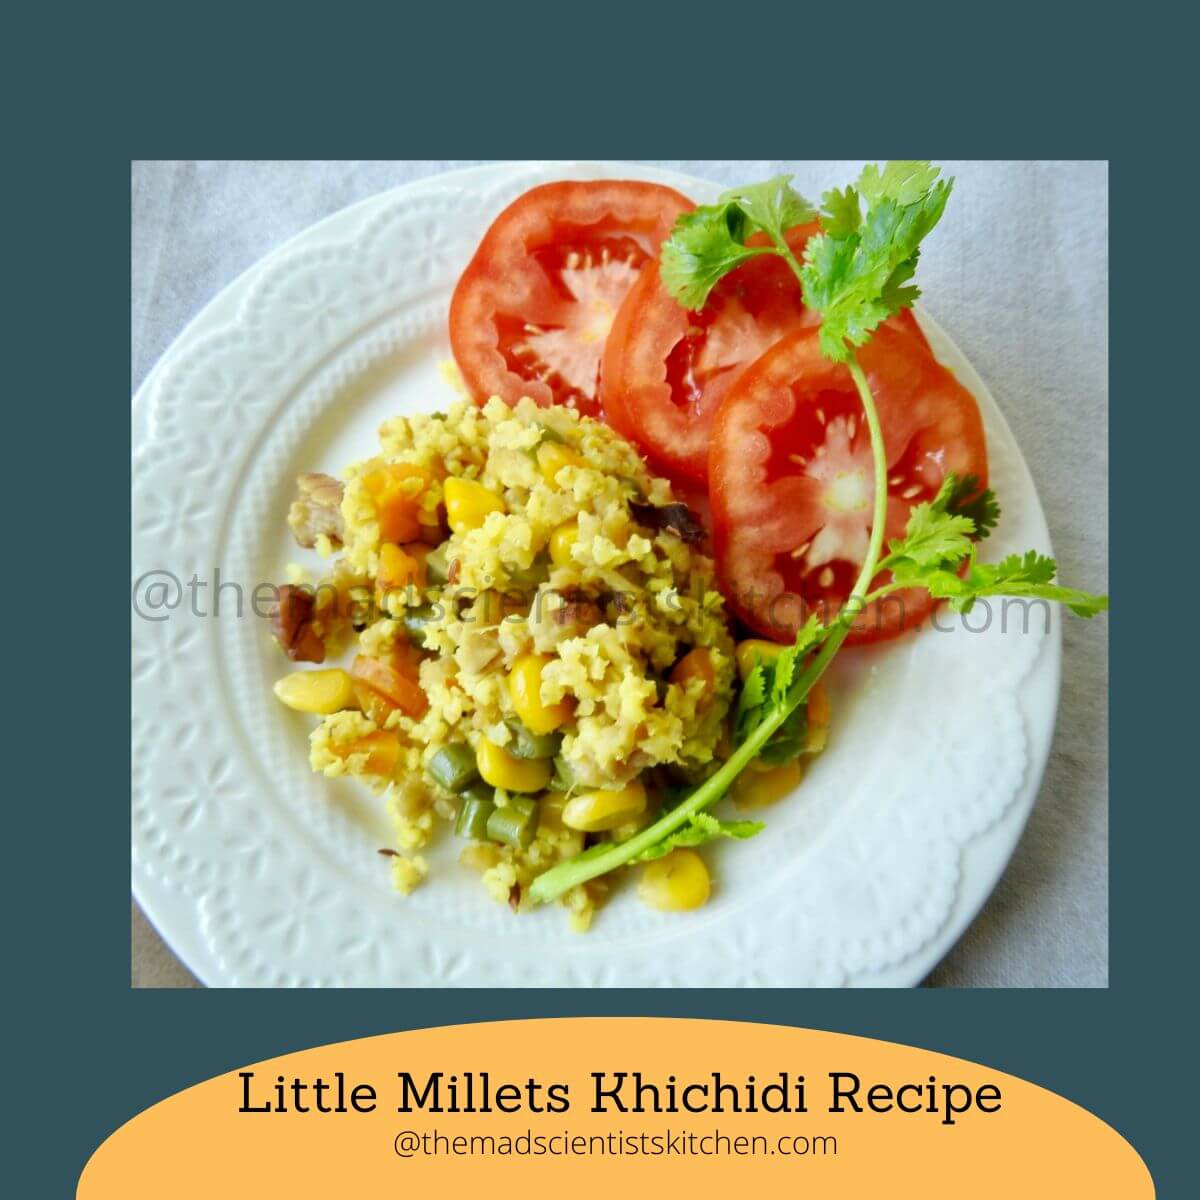 A serving of warm little millets khichidi, a comforting and flavourful Indian grain dish.